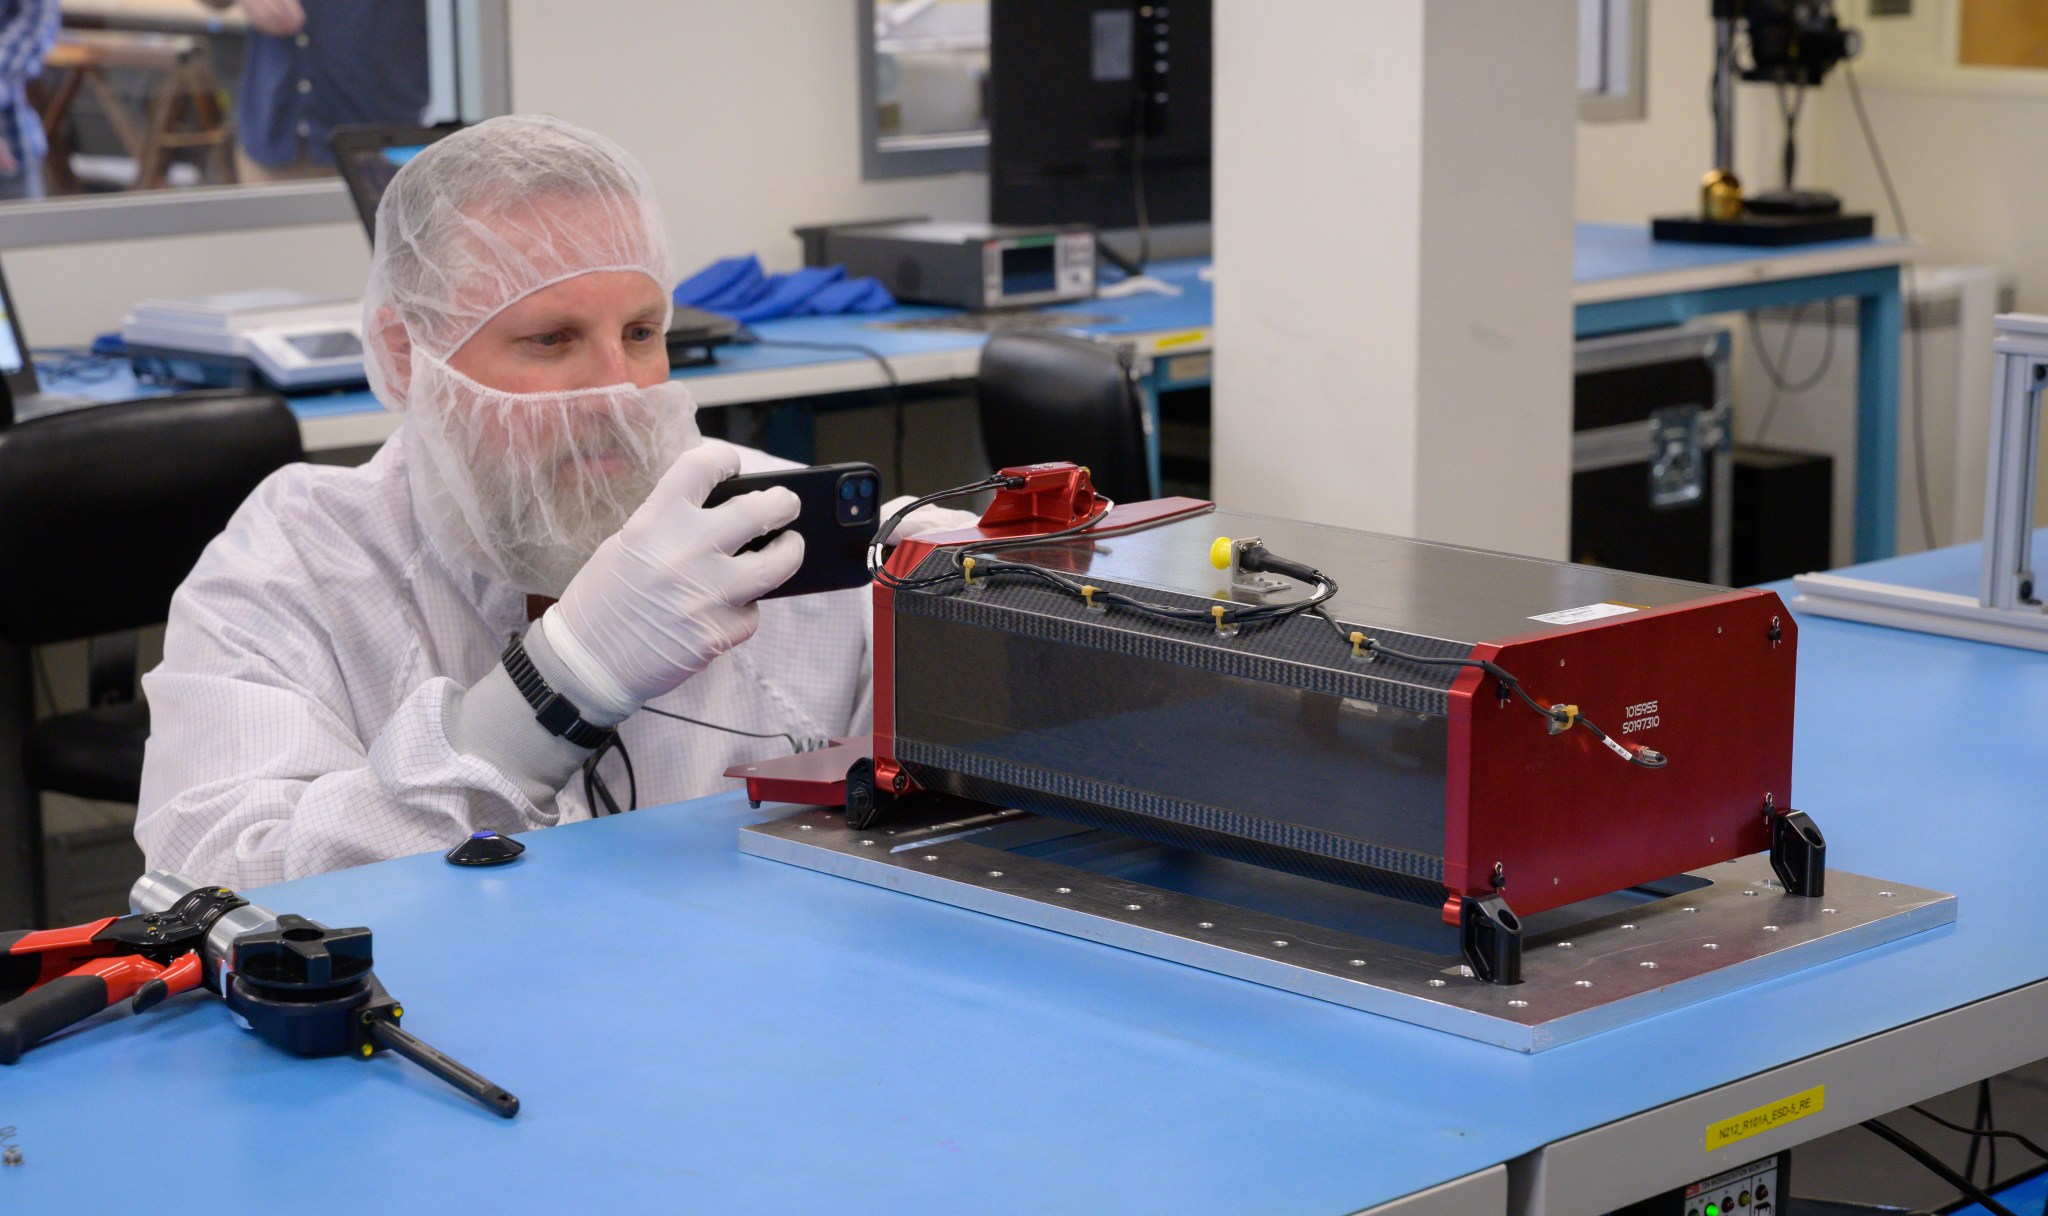 Researcher with hair net, mask, gloves, and lab coat works on box-like mechanical structure on a table.